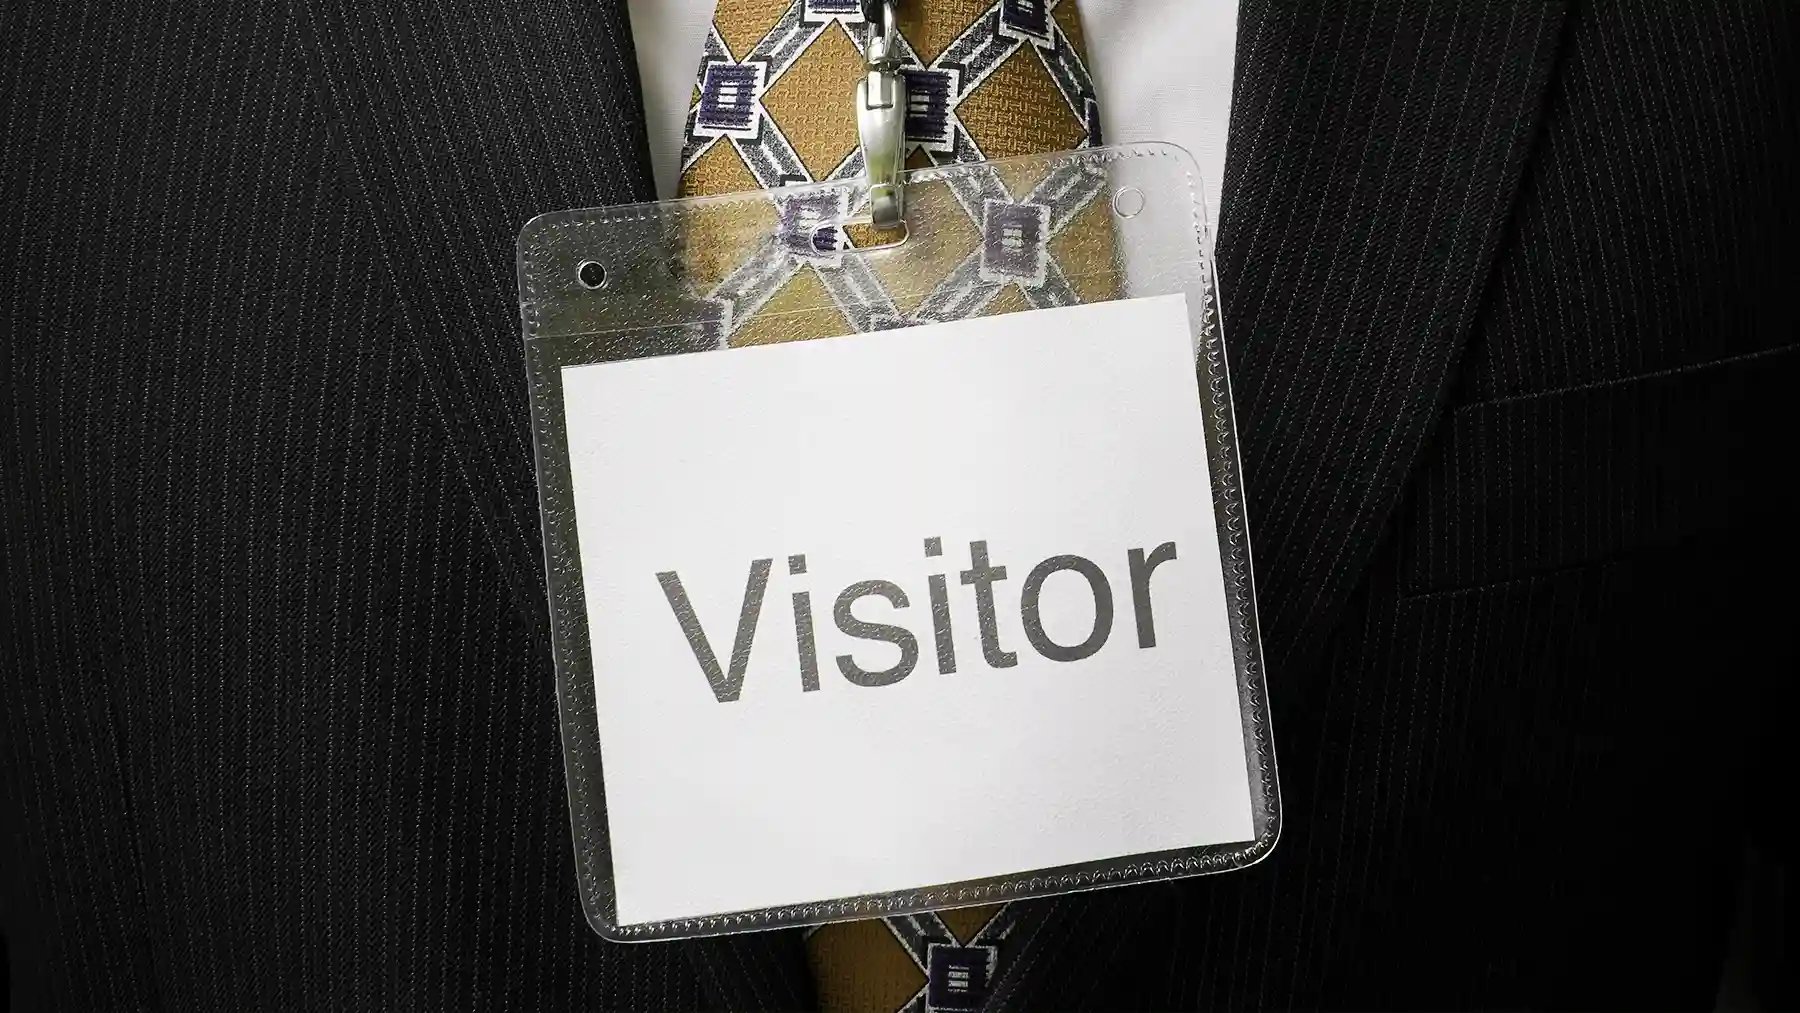 Visitor Passes